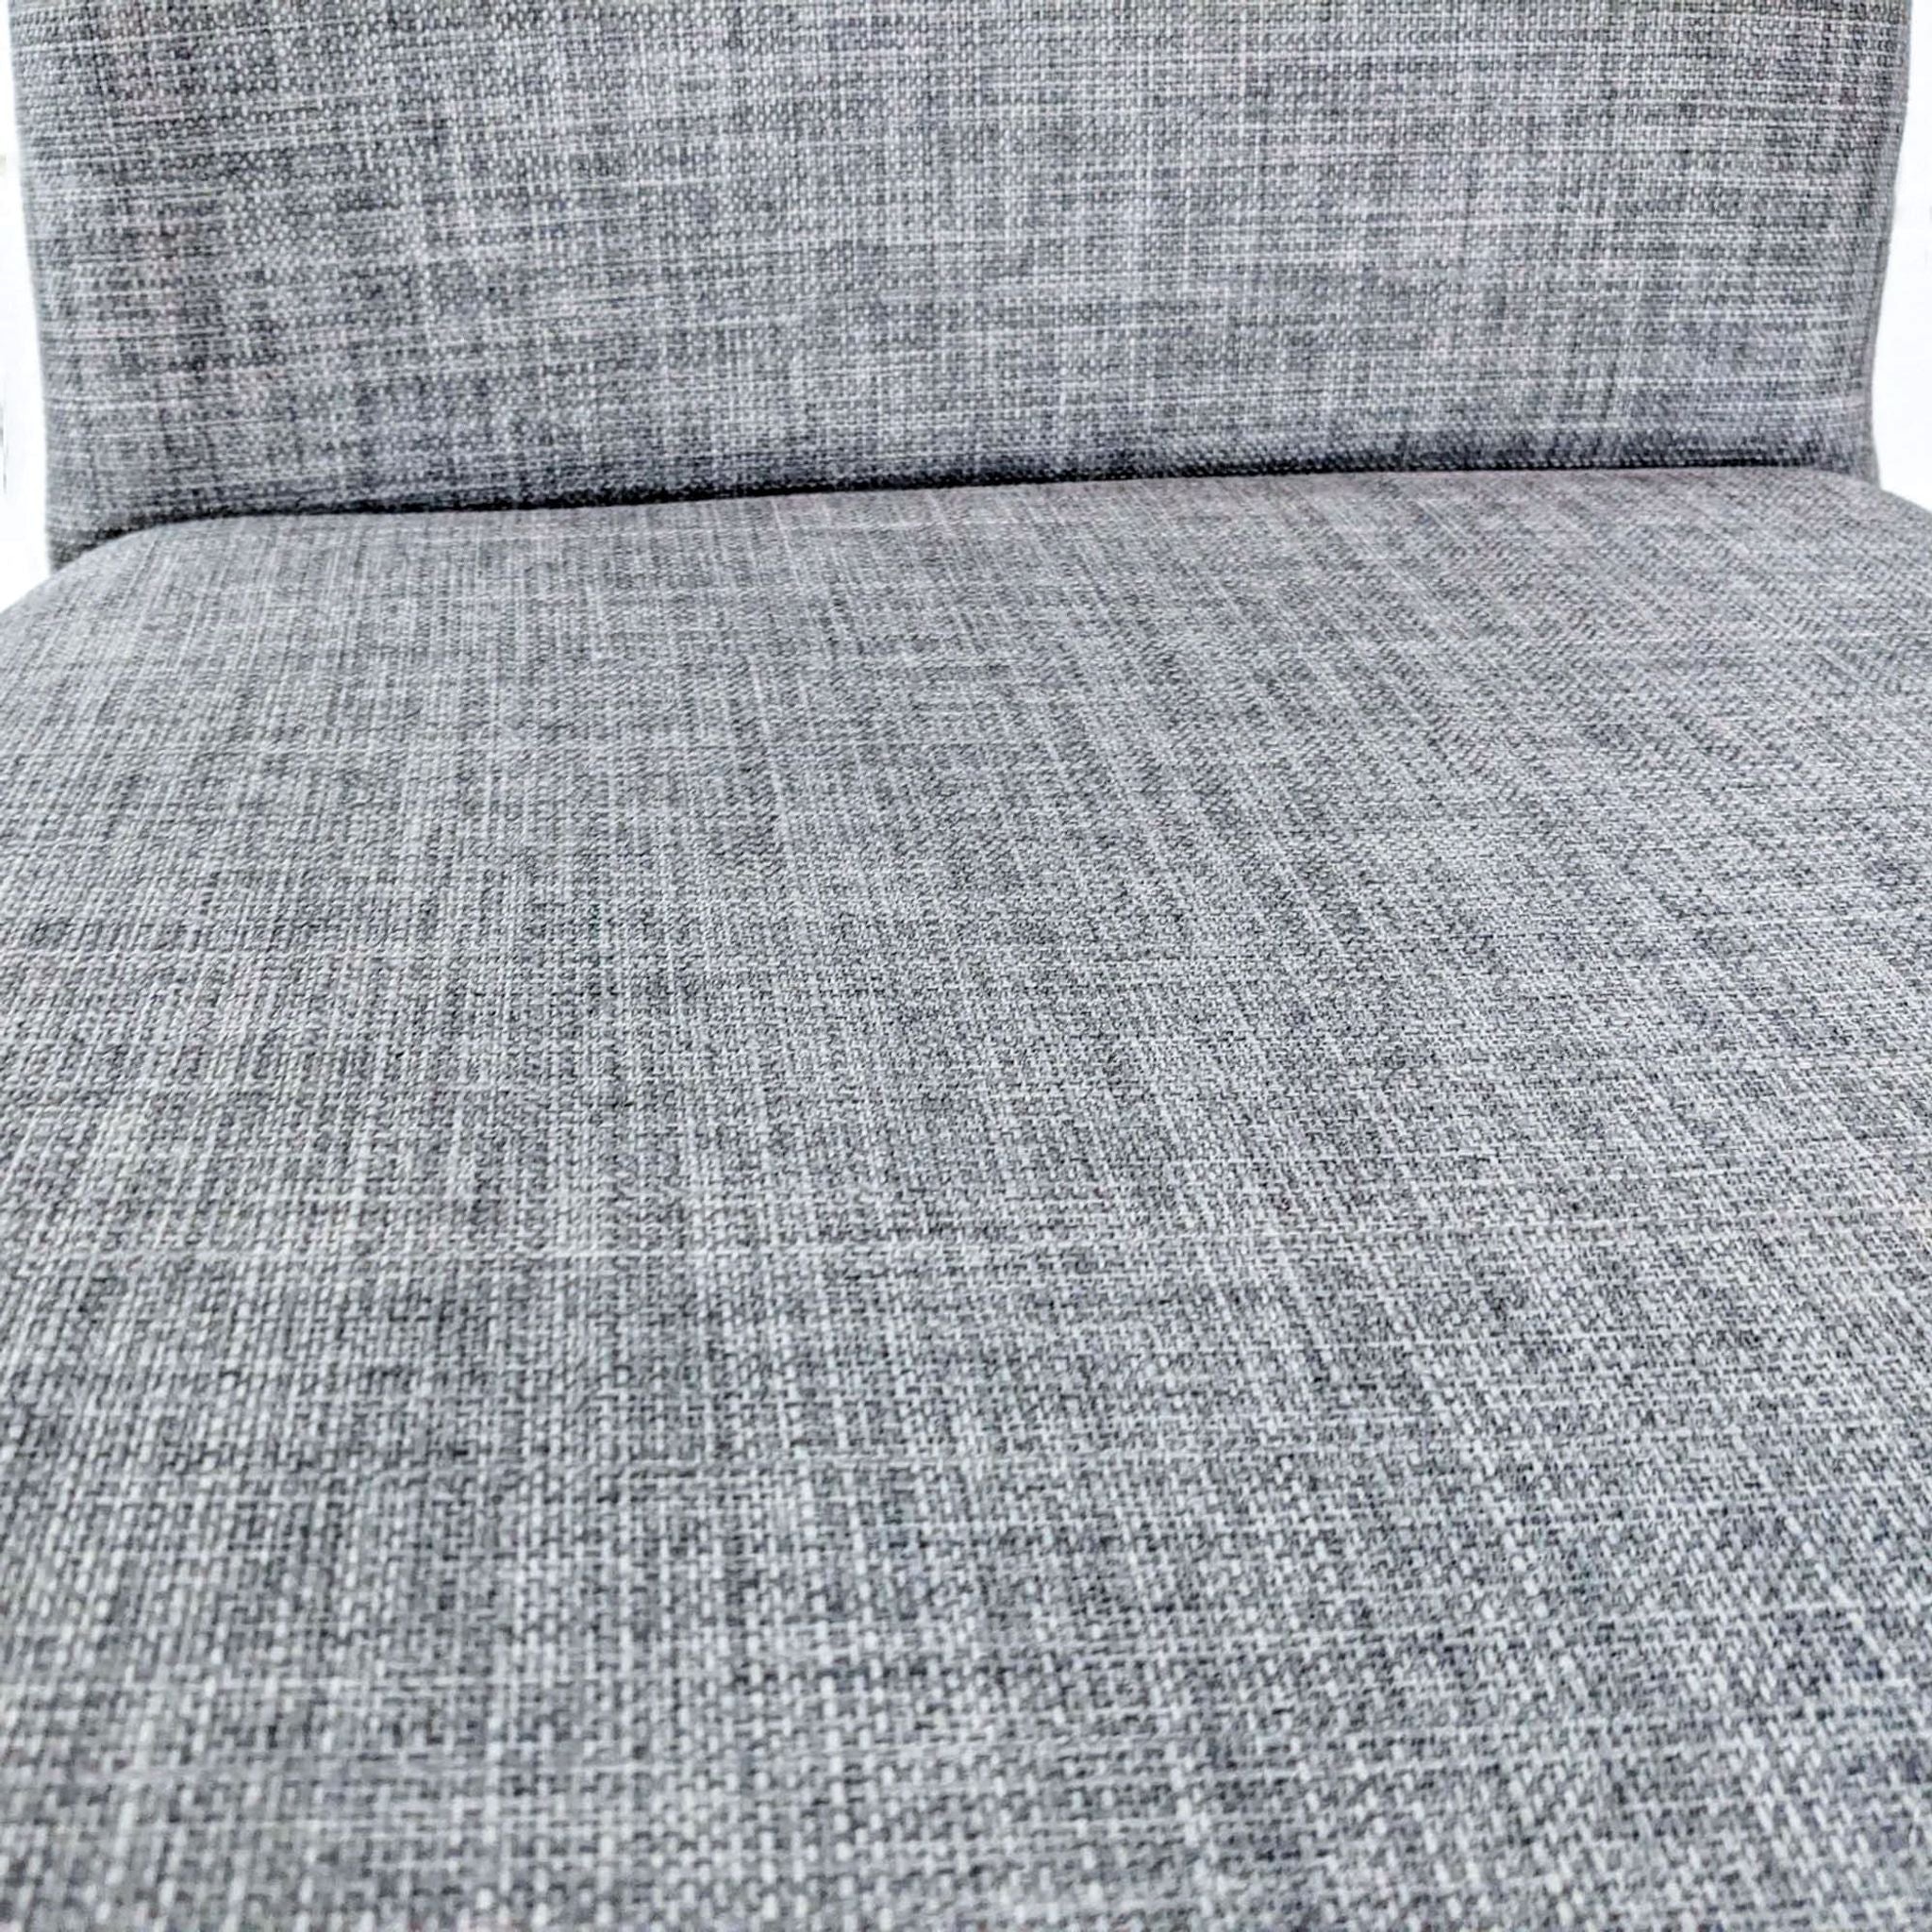 Alt text 2: Close-up of gray fabric texture on a Reperch upholstered meeting chair seat and backrest.